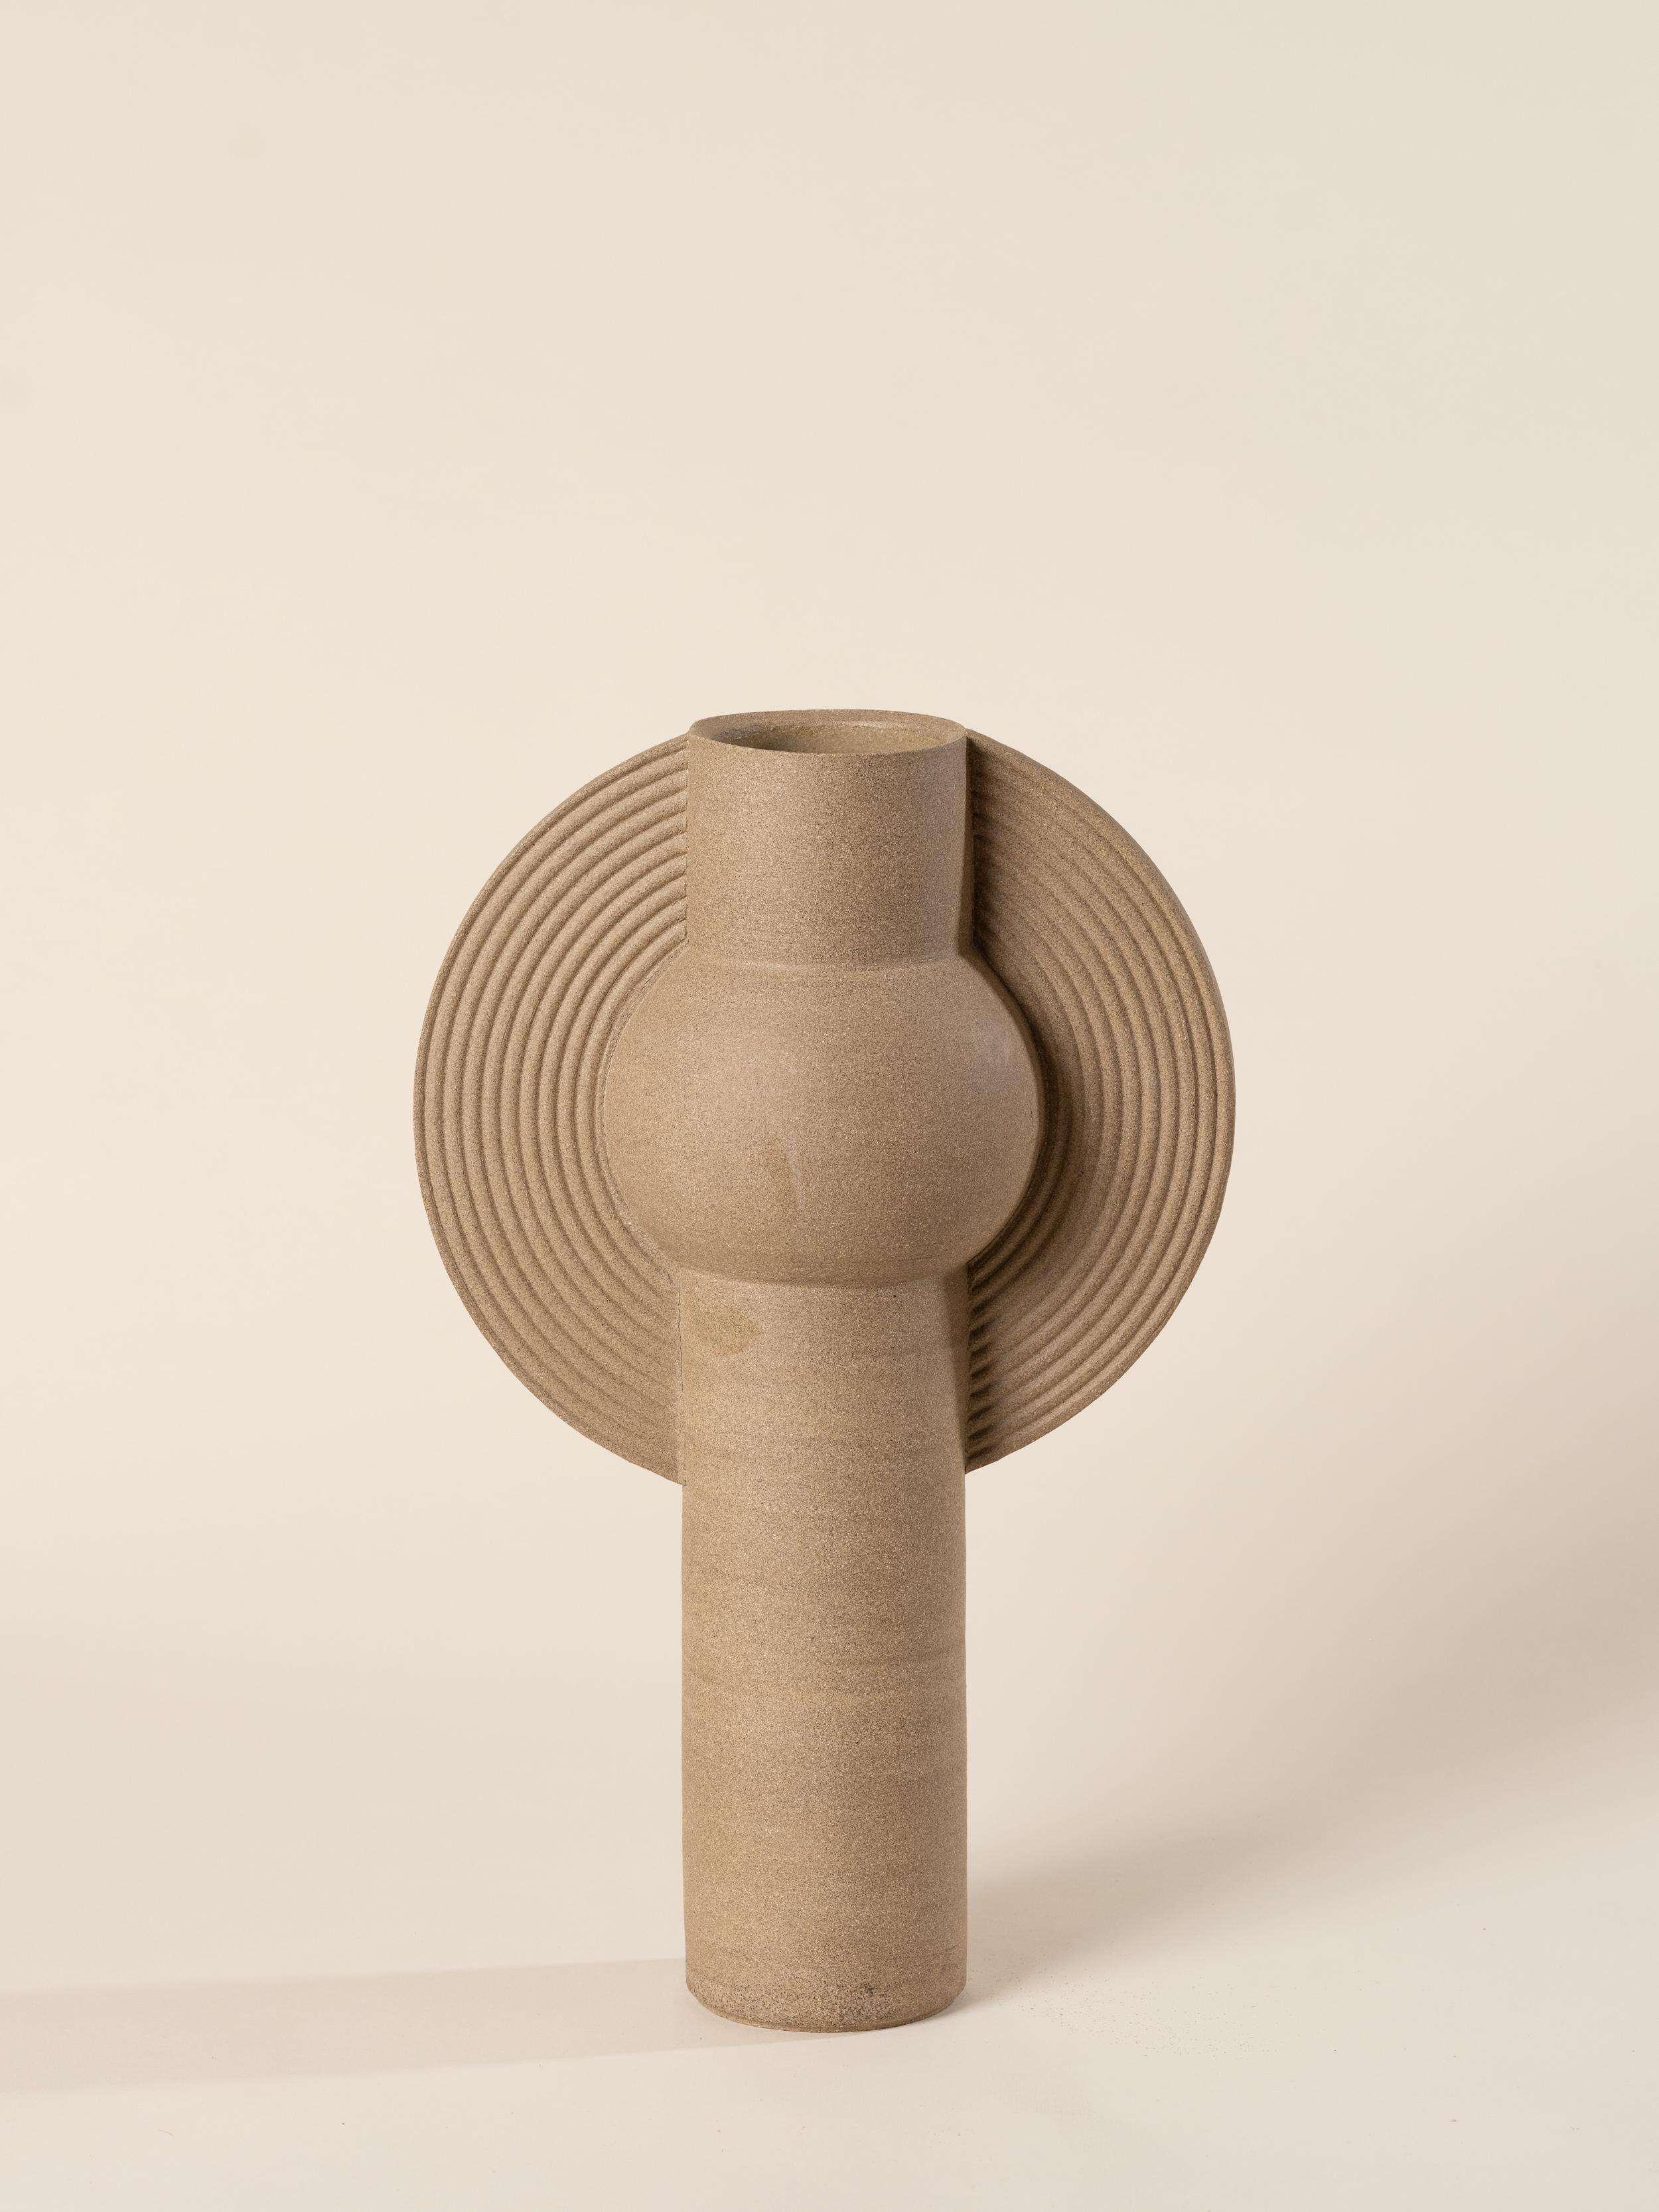 Vase in tan stoneware.

Dimensions: approx. 16.5” h x 10” w

Inside glazing for water tightness